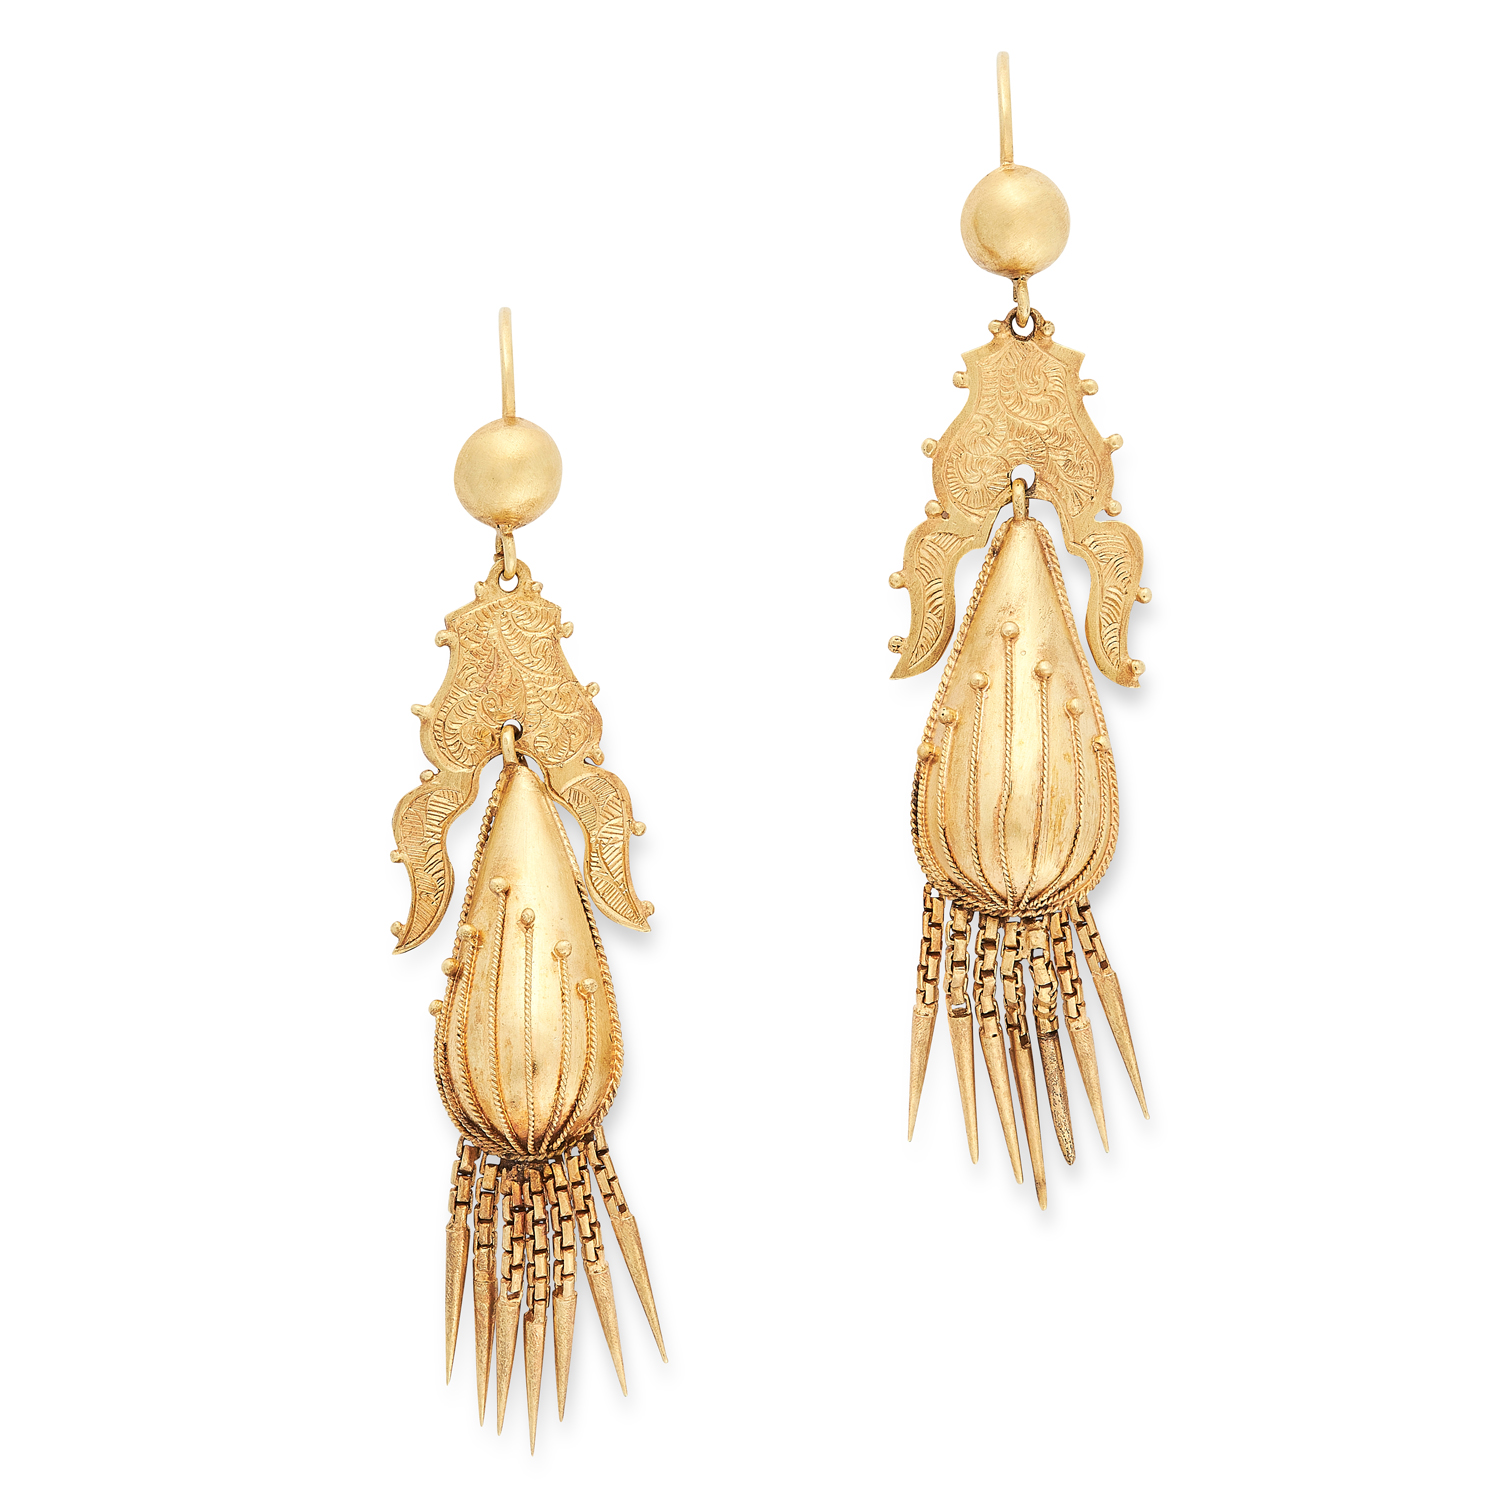 A PAIR OF ANTIQUE VICTORIAN TASSEL EARRINGS, 19TH CENTURY in high carat yellow gold, the articulated